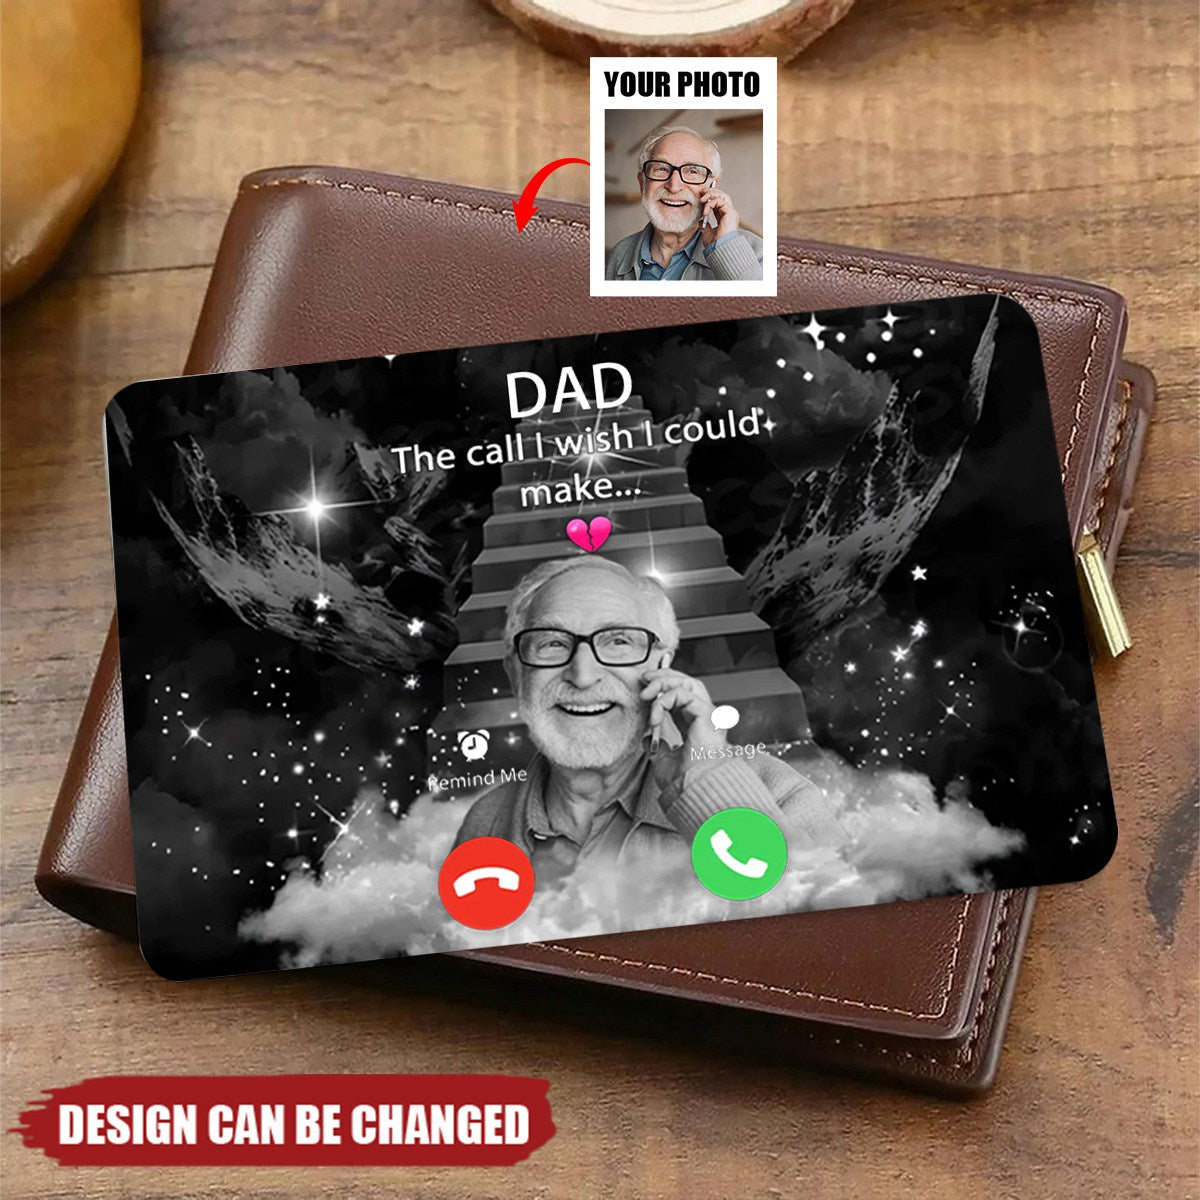 The Call I Wish I Could Make - Personalized Photo Aluminum Wallet Card